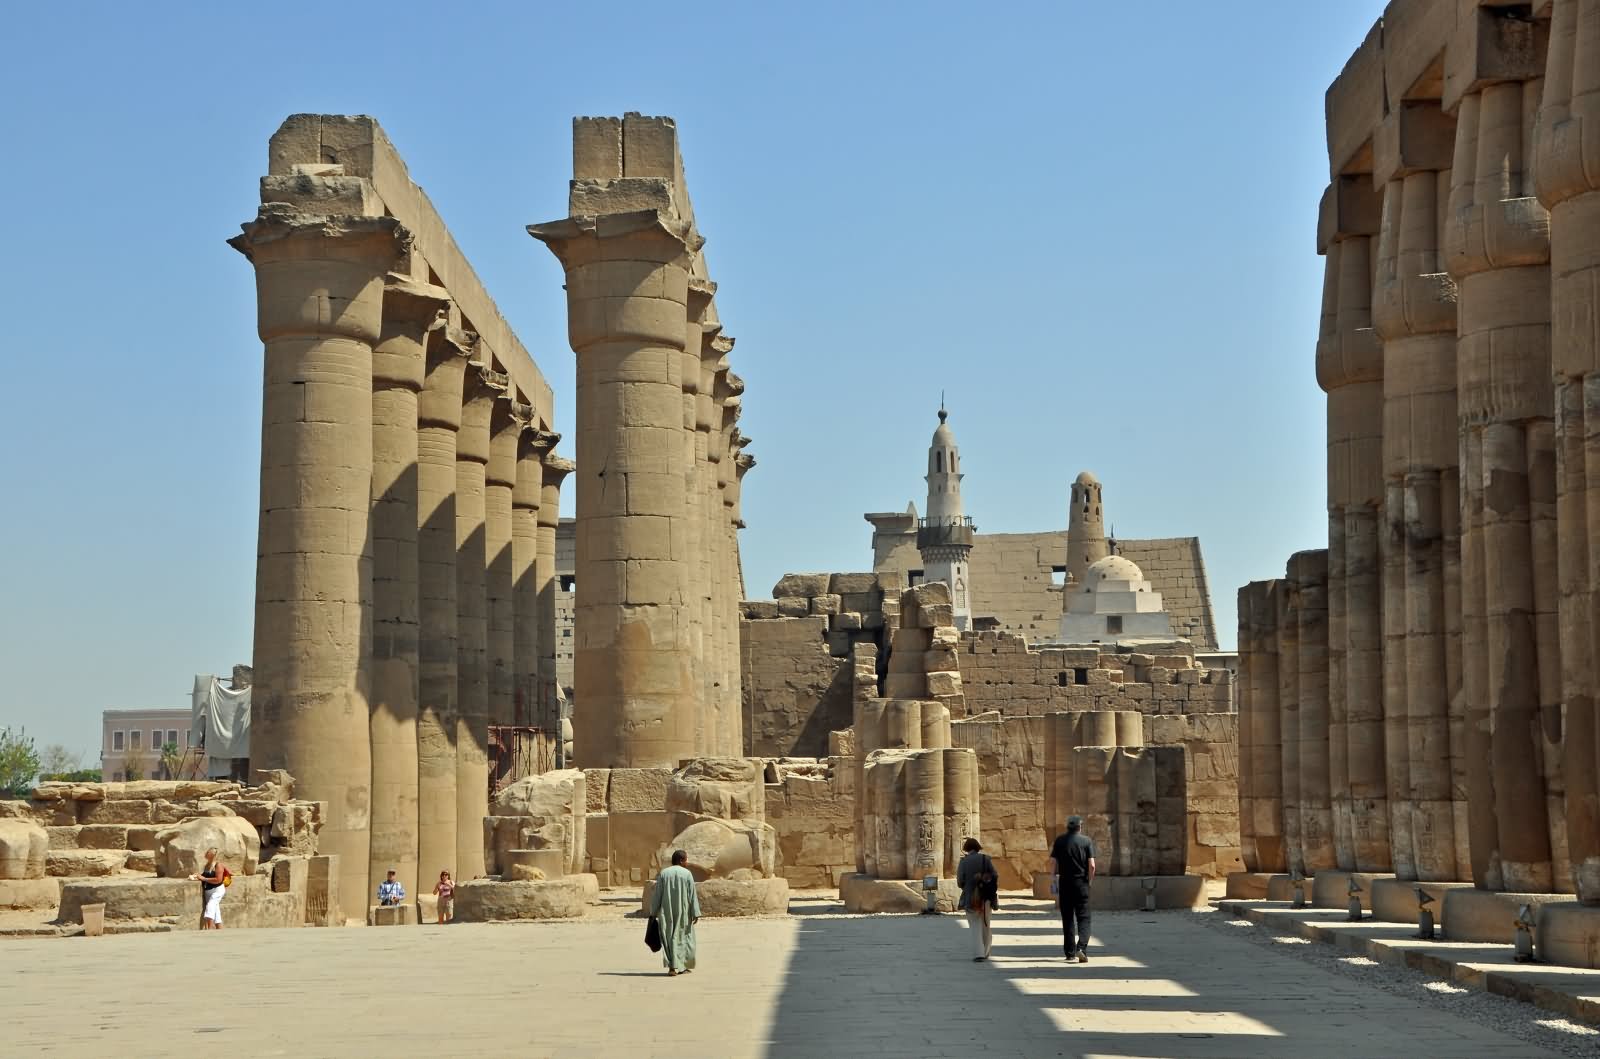 Pillars At The Luxor Temple, Egypt